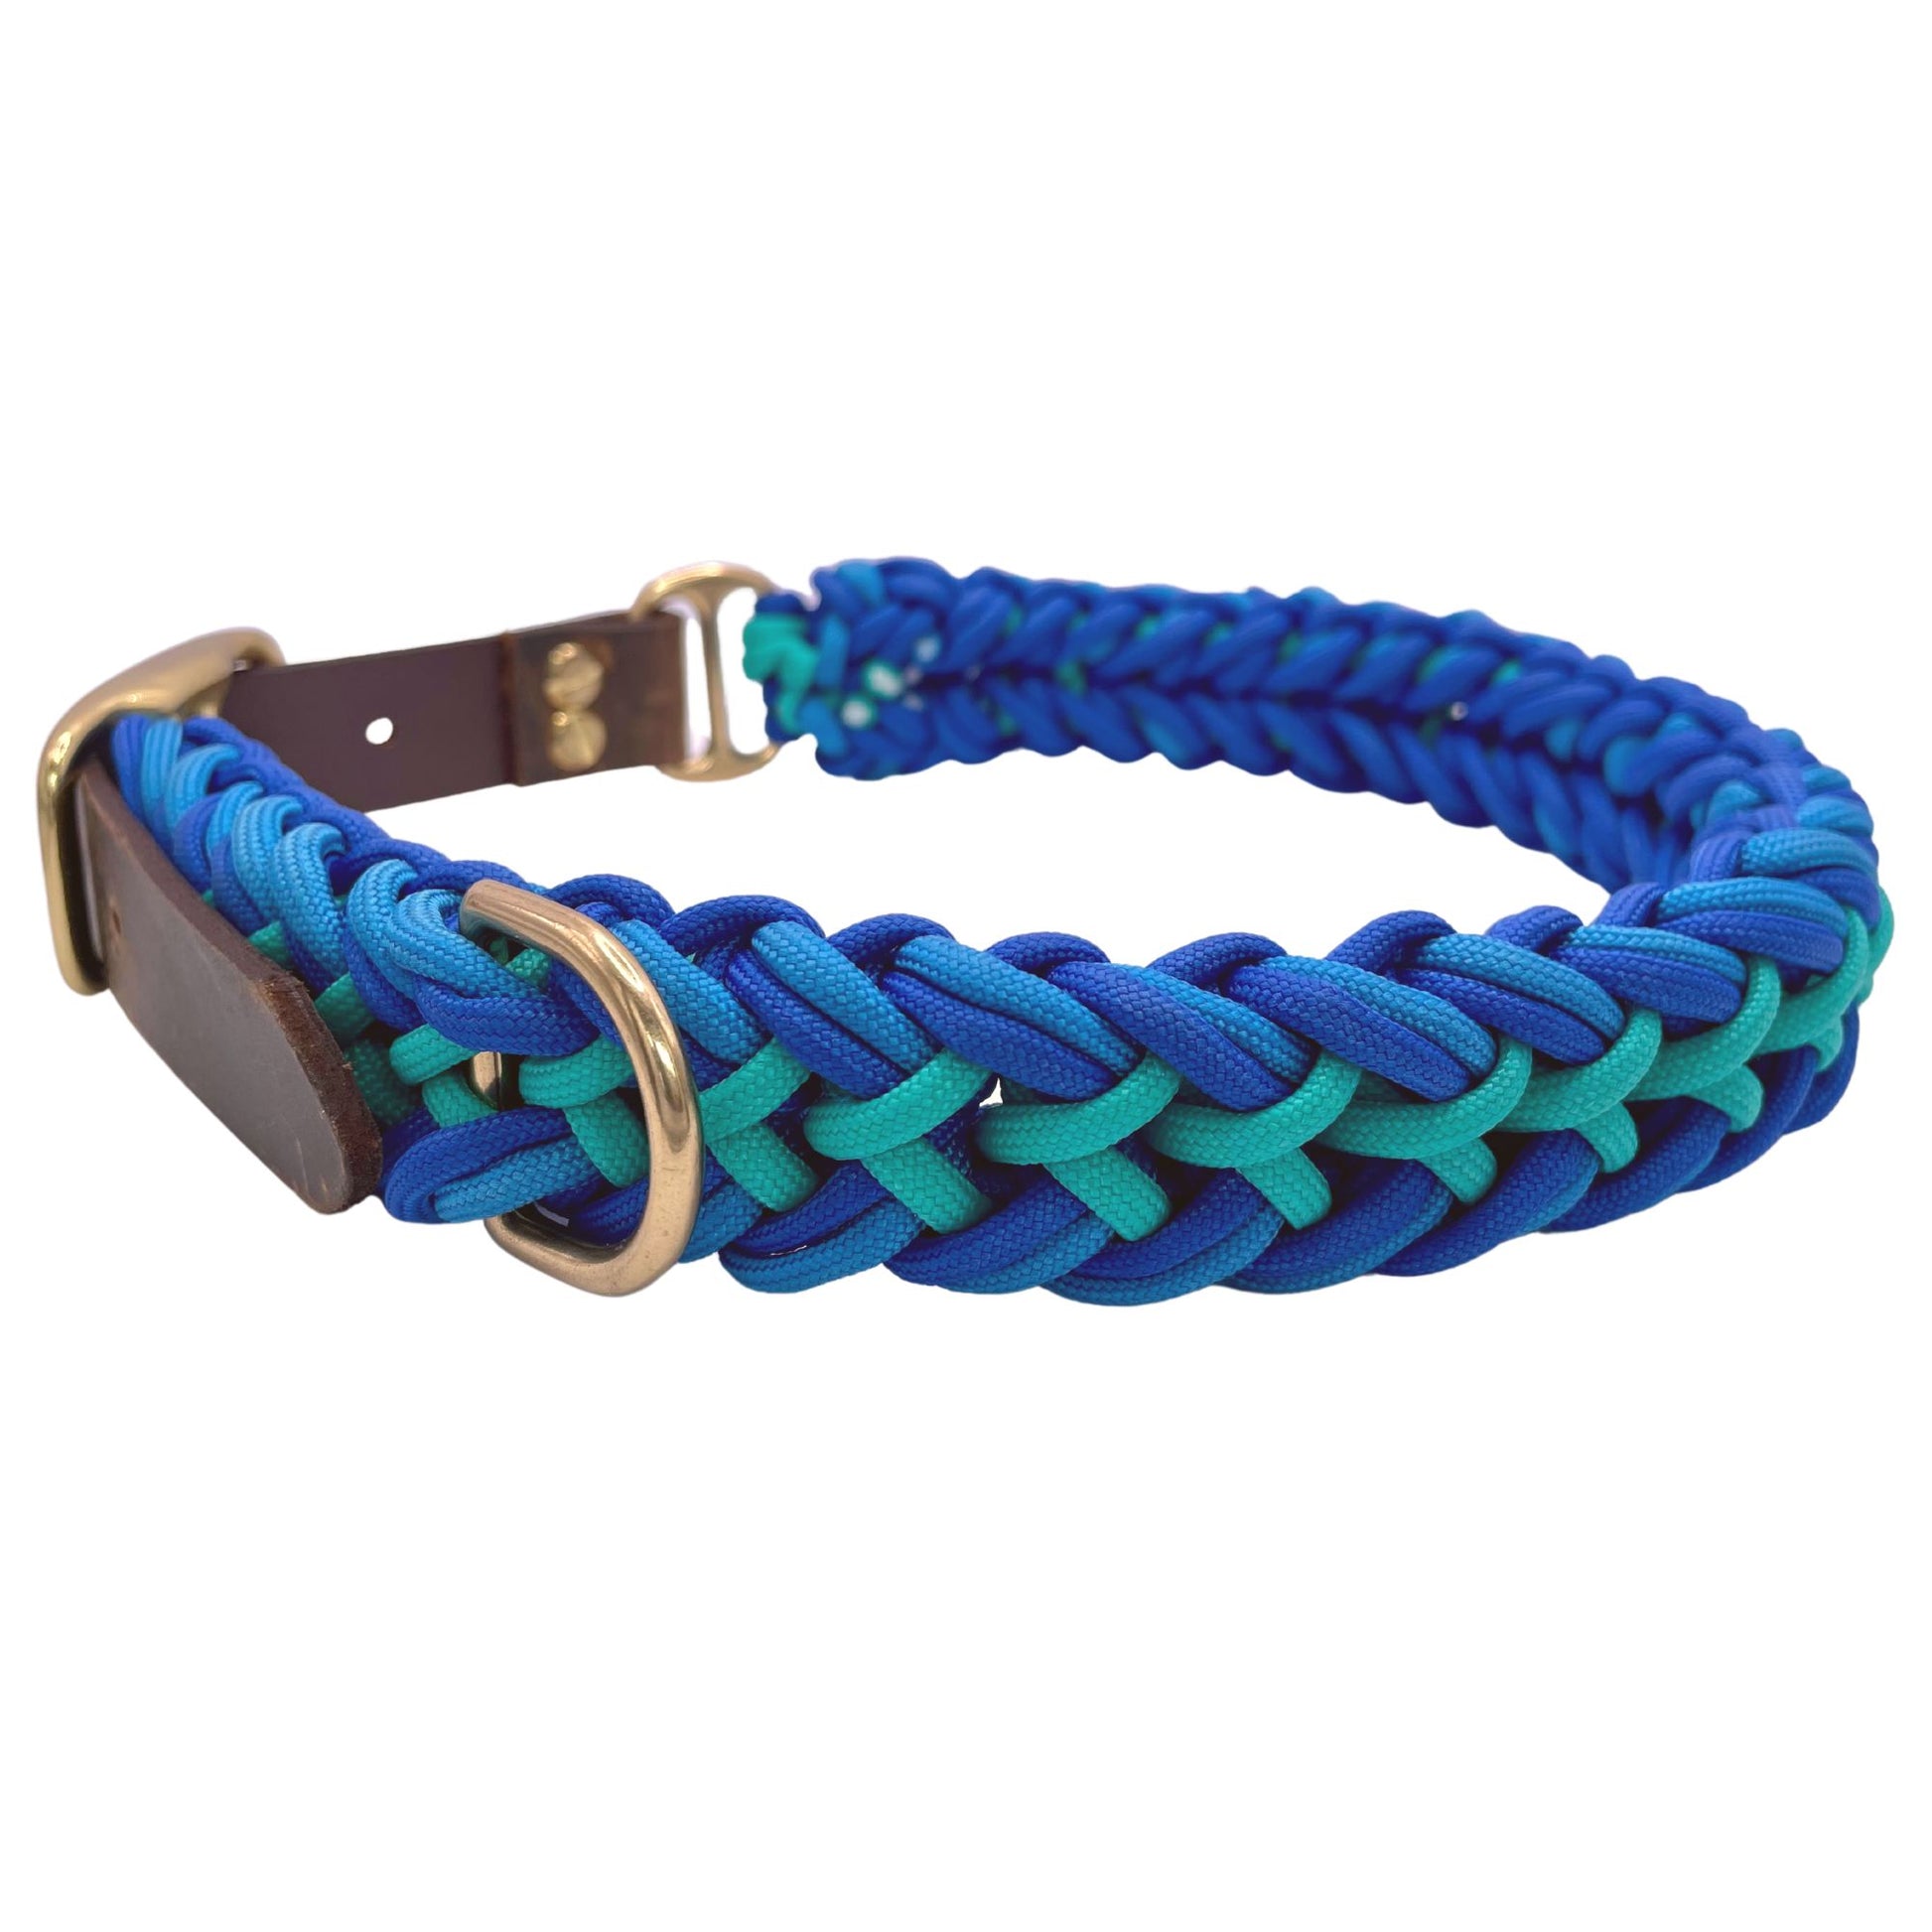 Premium Teal and Blue Paracord Dog Collar with Gold hardware and leather or Biothane belt